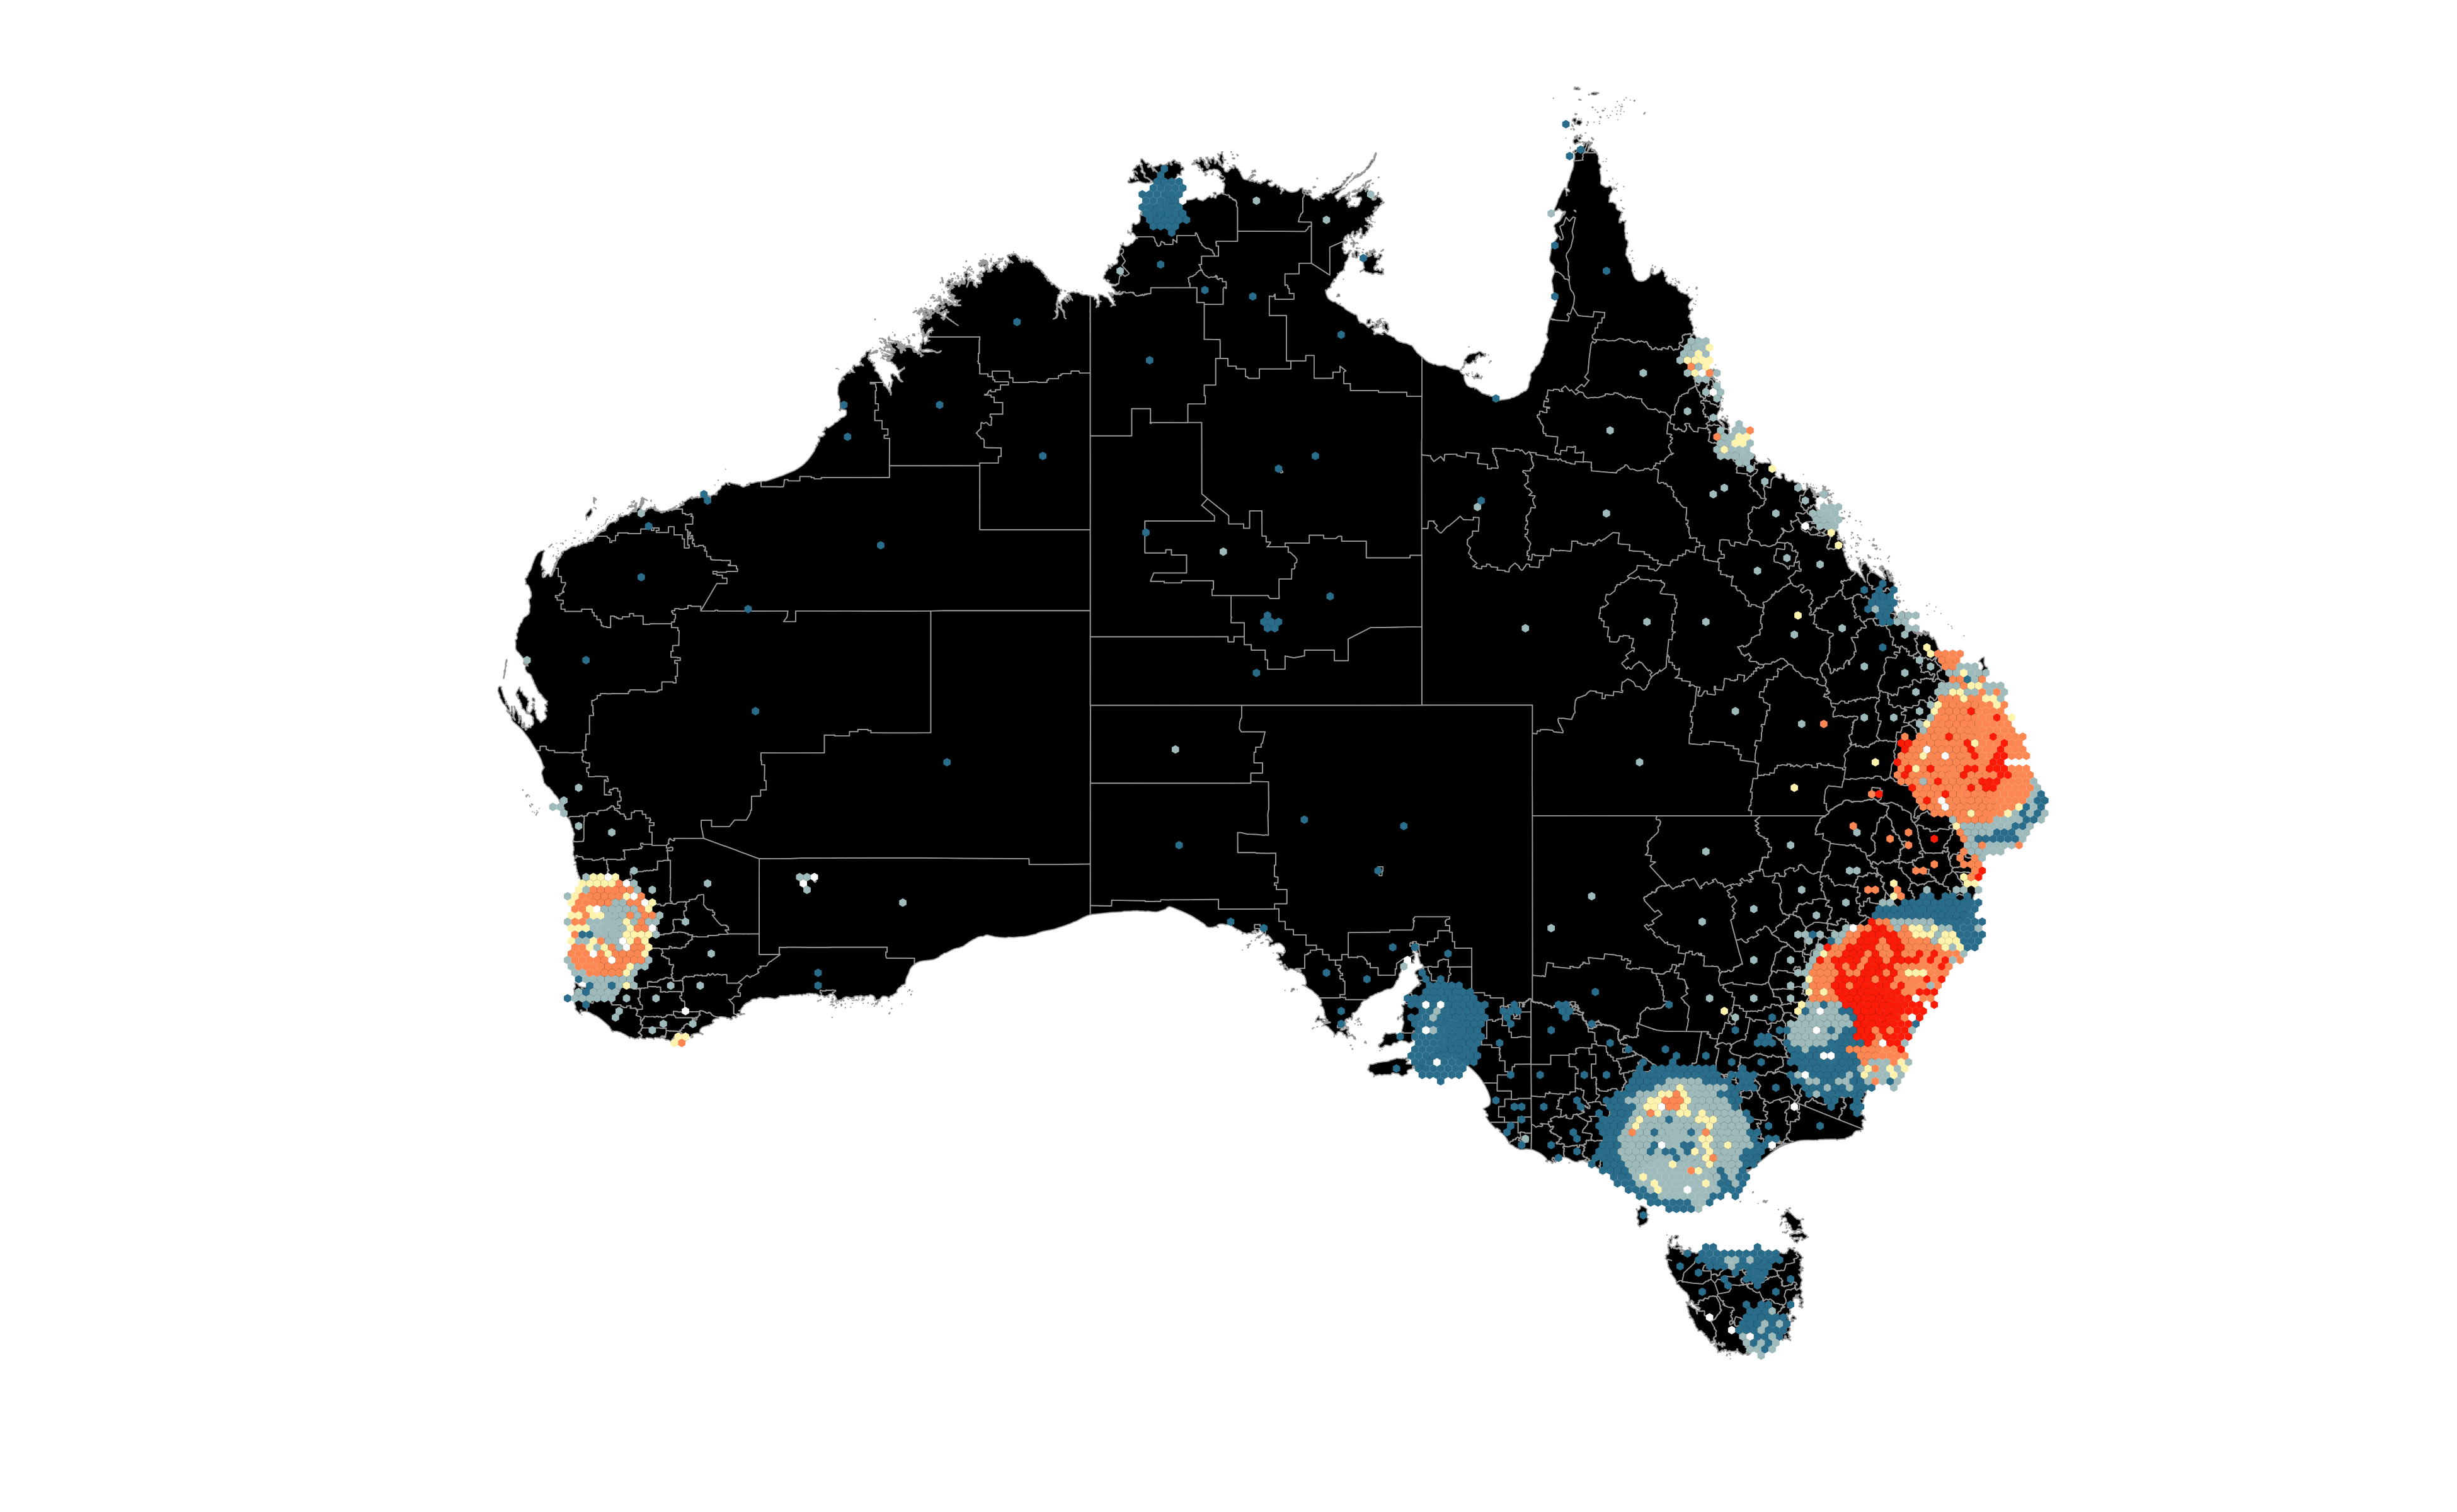 A hexagon tile map of female thyroid cancer incidence in Australia, the same data as shown in the choropleth map in Figure 1. The high incidence in several of the metropolitan regions (Brisbane, Sydney and Perth) can now be seen, along with numerous isolated spots.